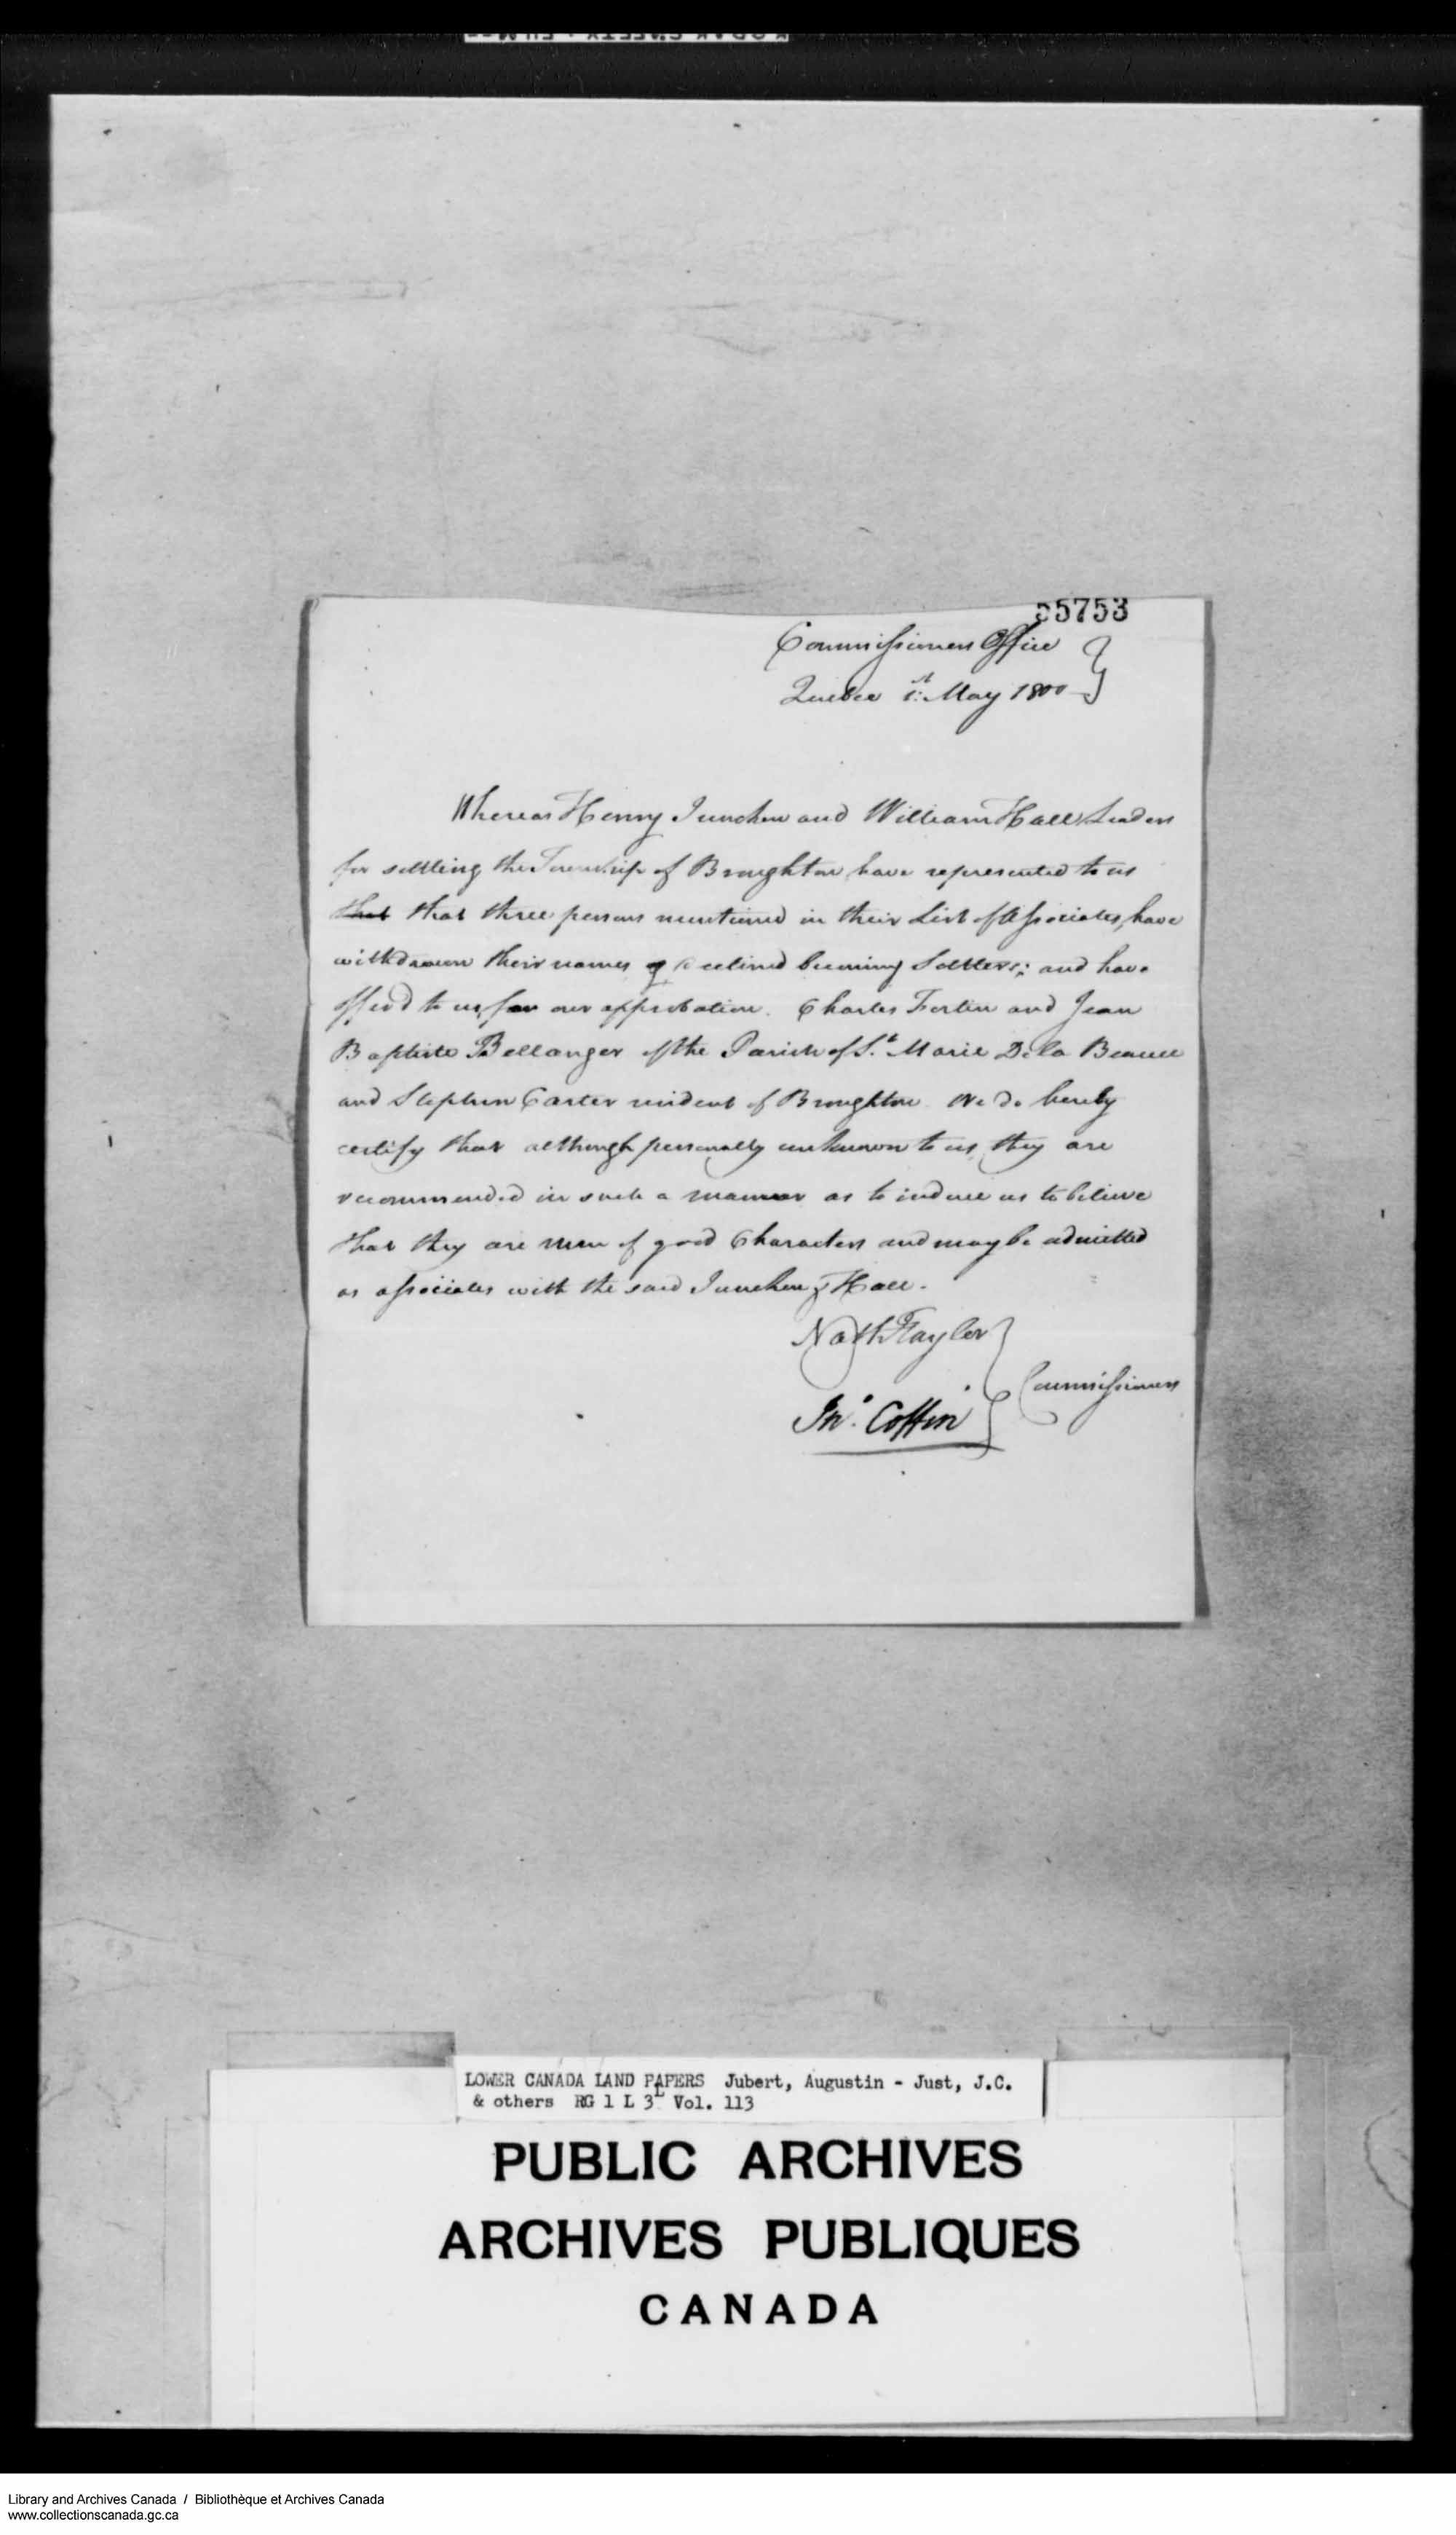 Digitized page of  for Image No.: e008700241